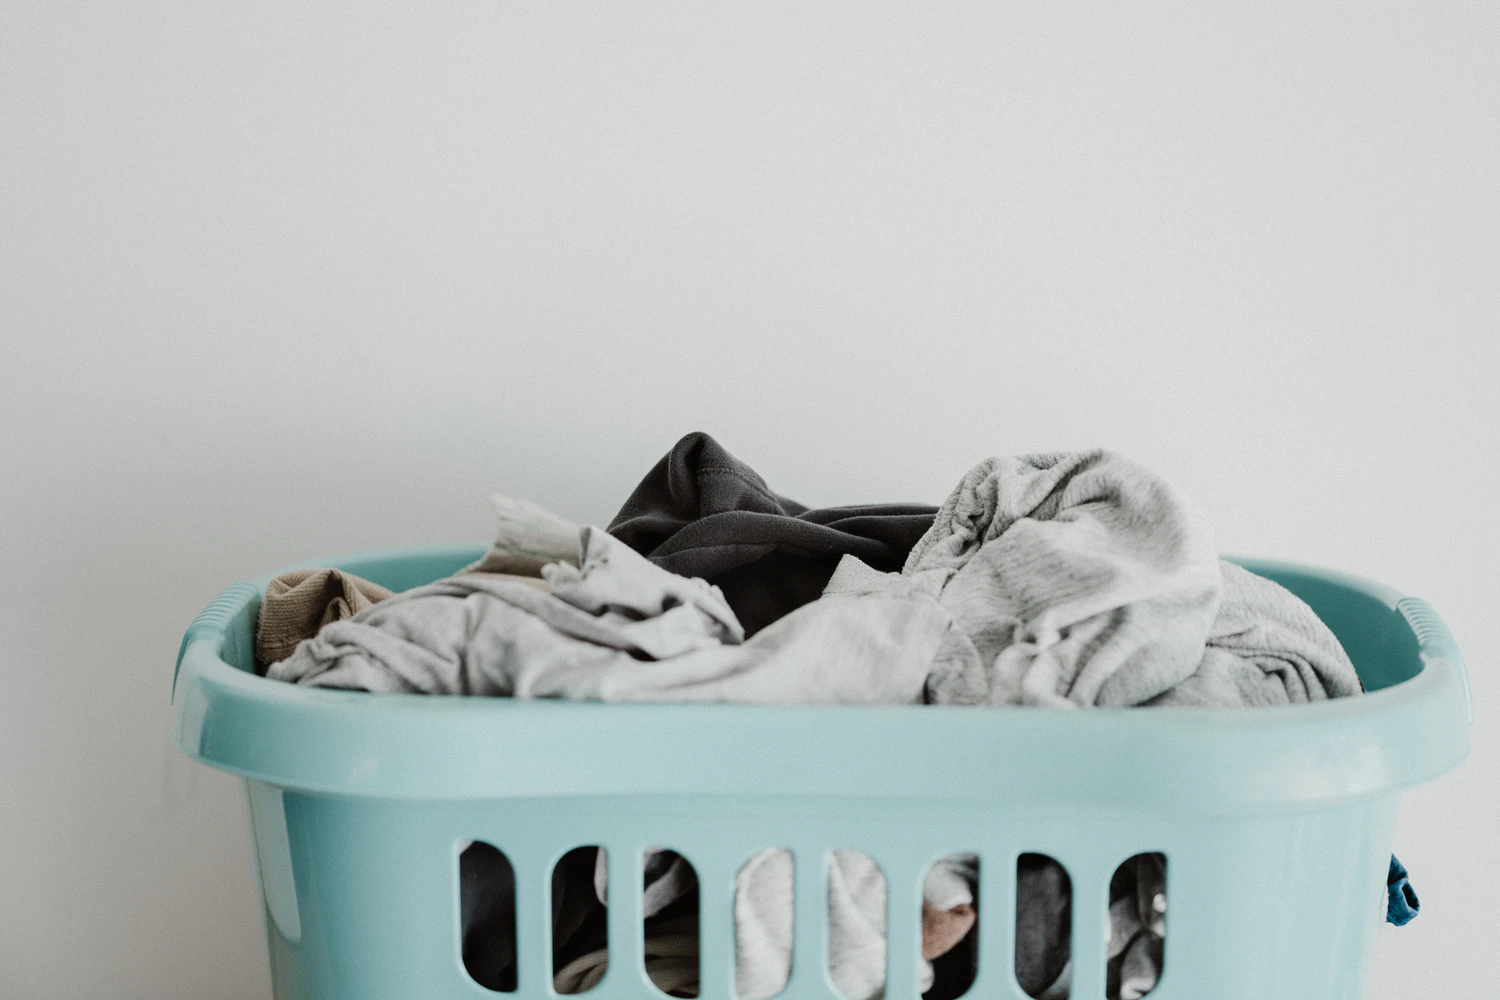 Time Management is Like A Pile of Laundry